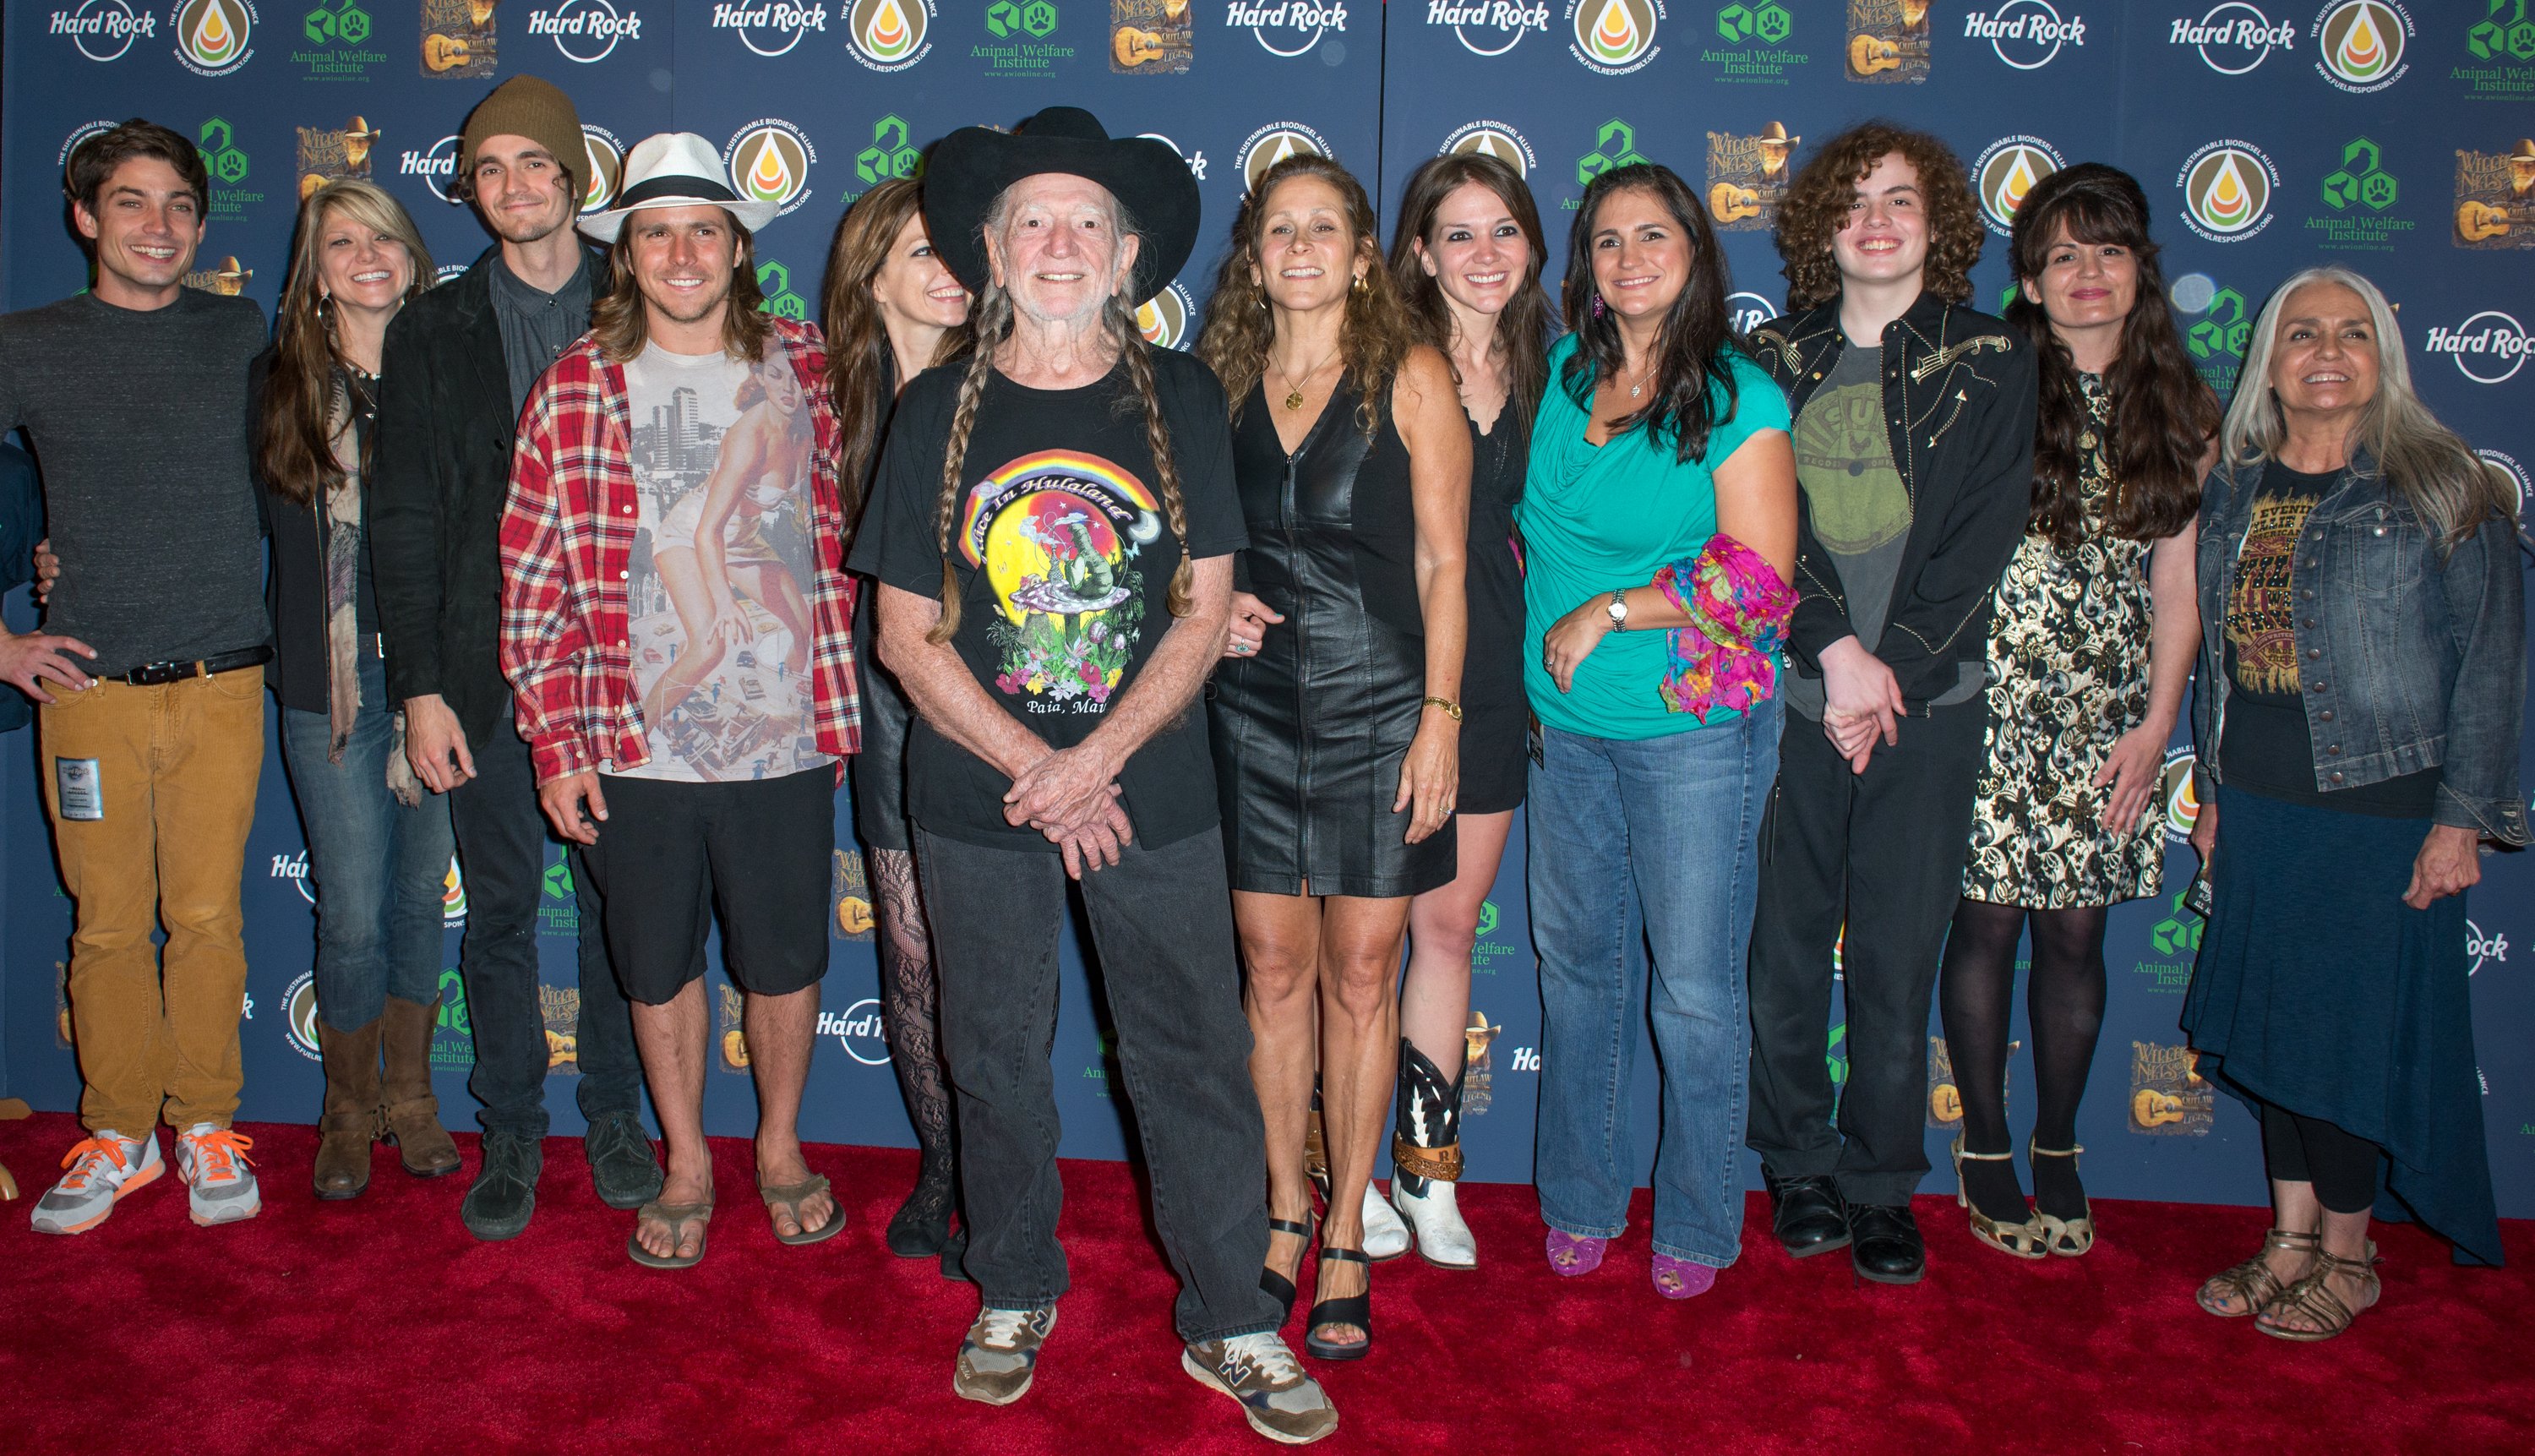 Willie Nelson and his family at Hard Rock Cafe, Times Square on June 6, 2013 in New York City | Source: Getty Images